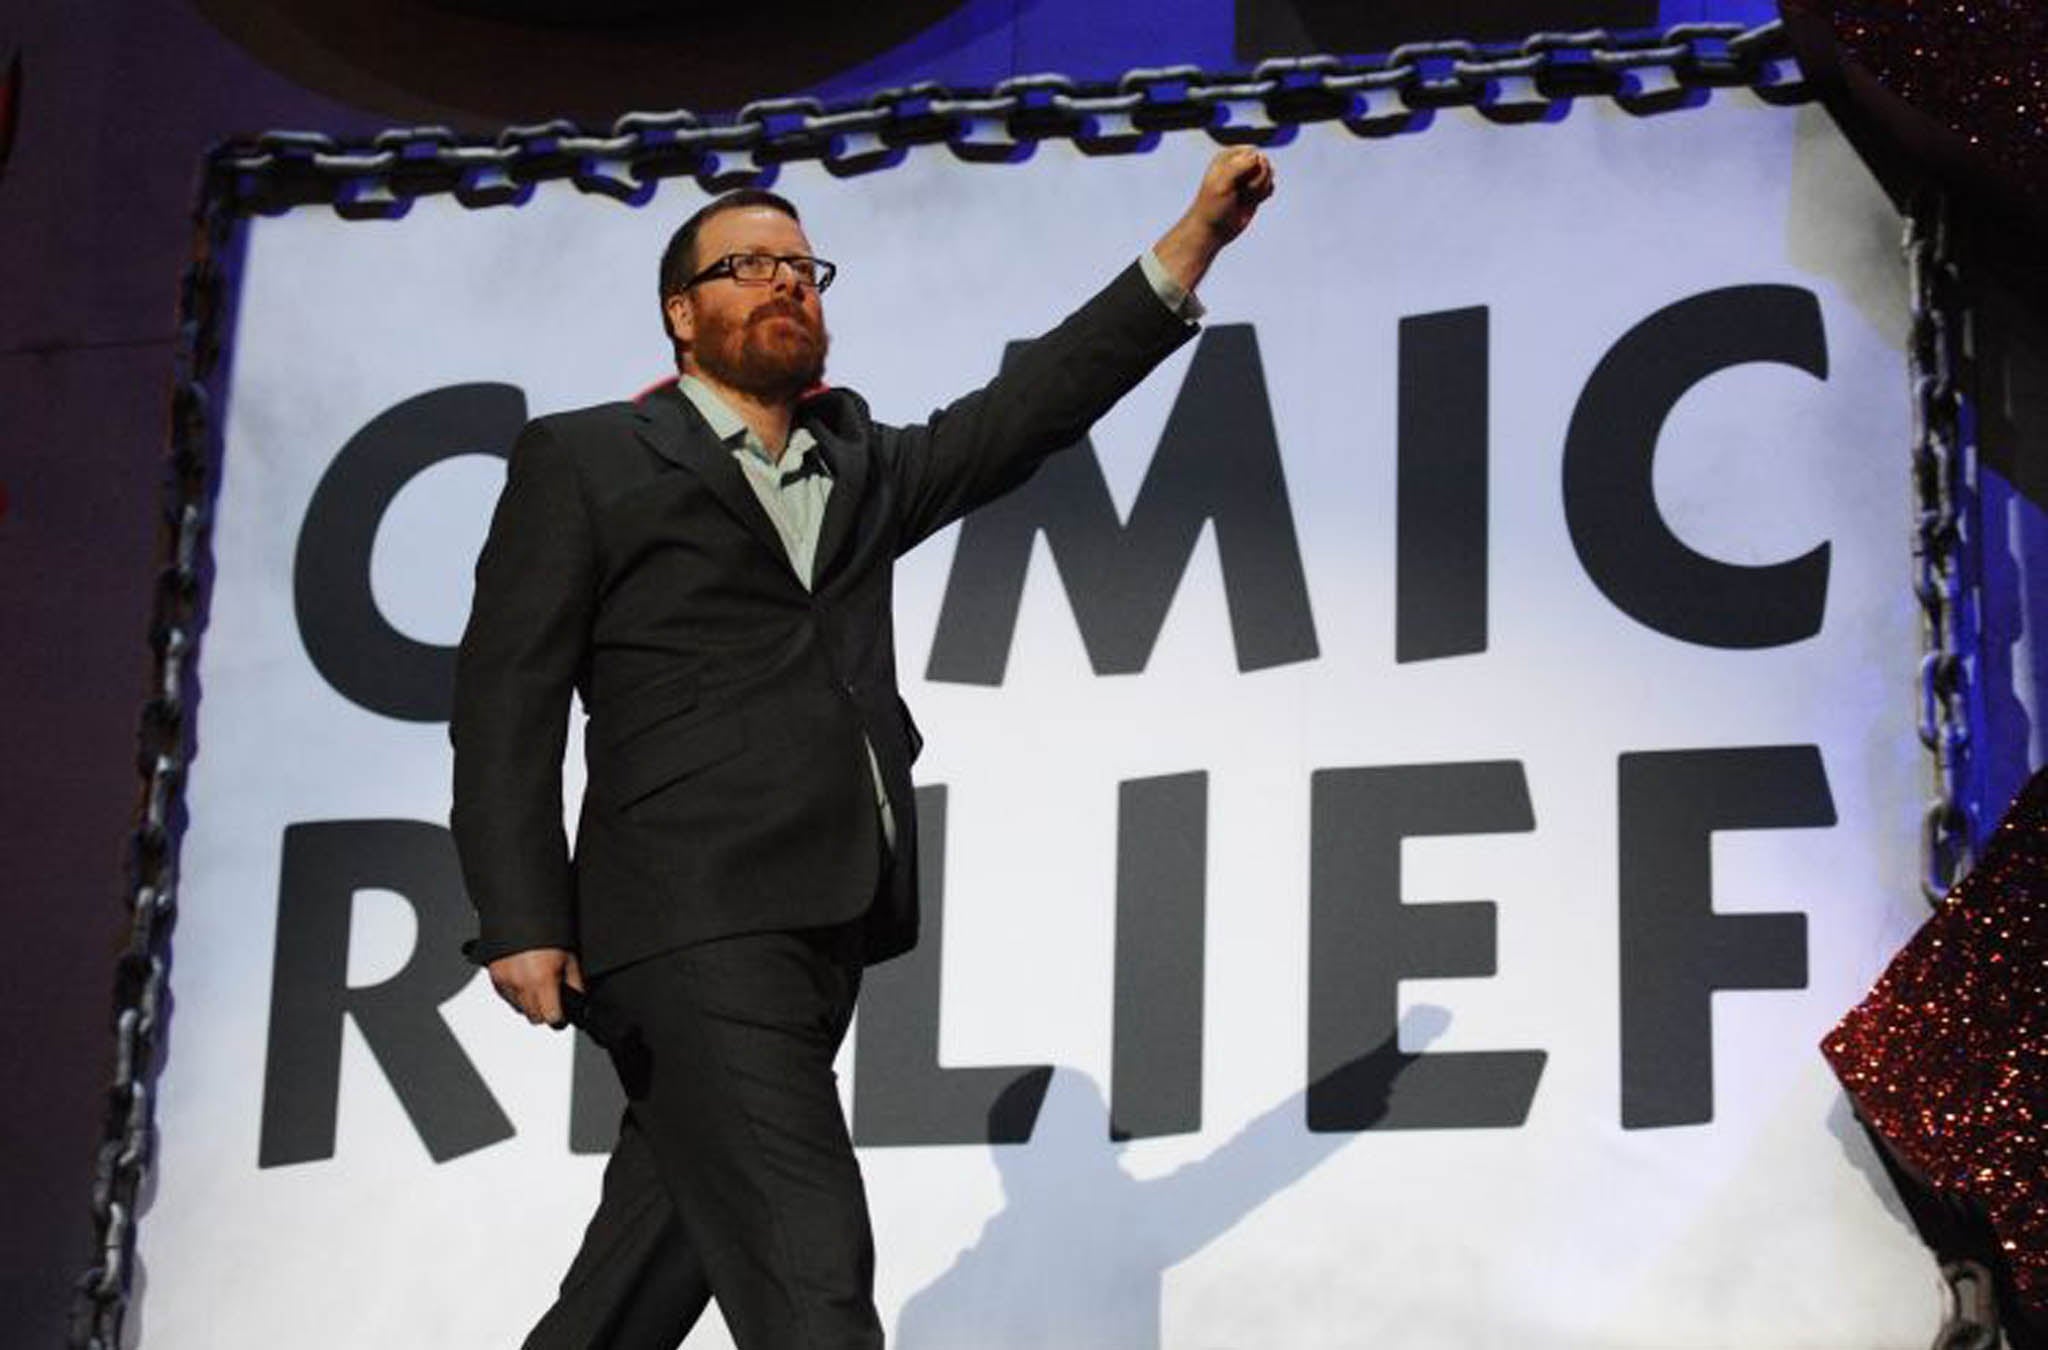 Frankie Boyle's jokes were cut from a Comic Relief broadcast